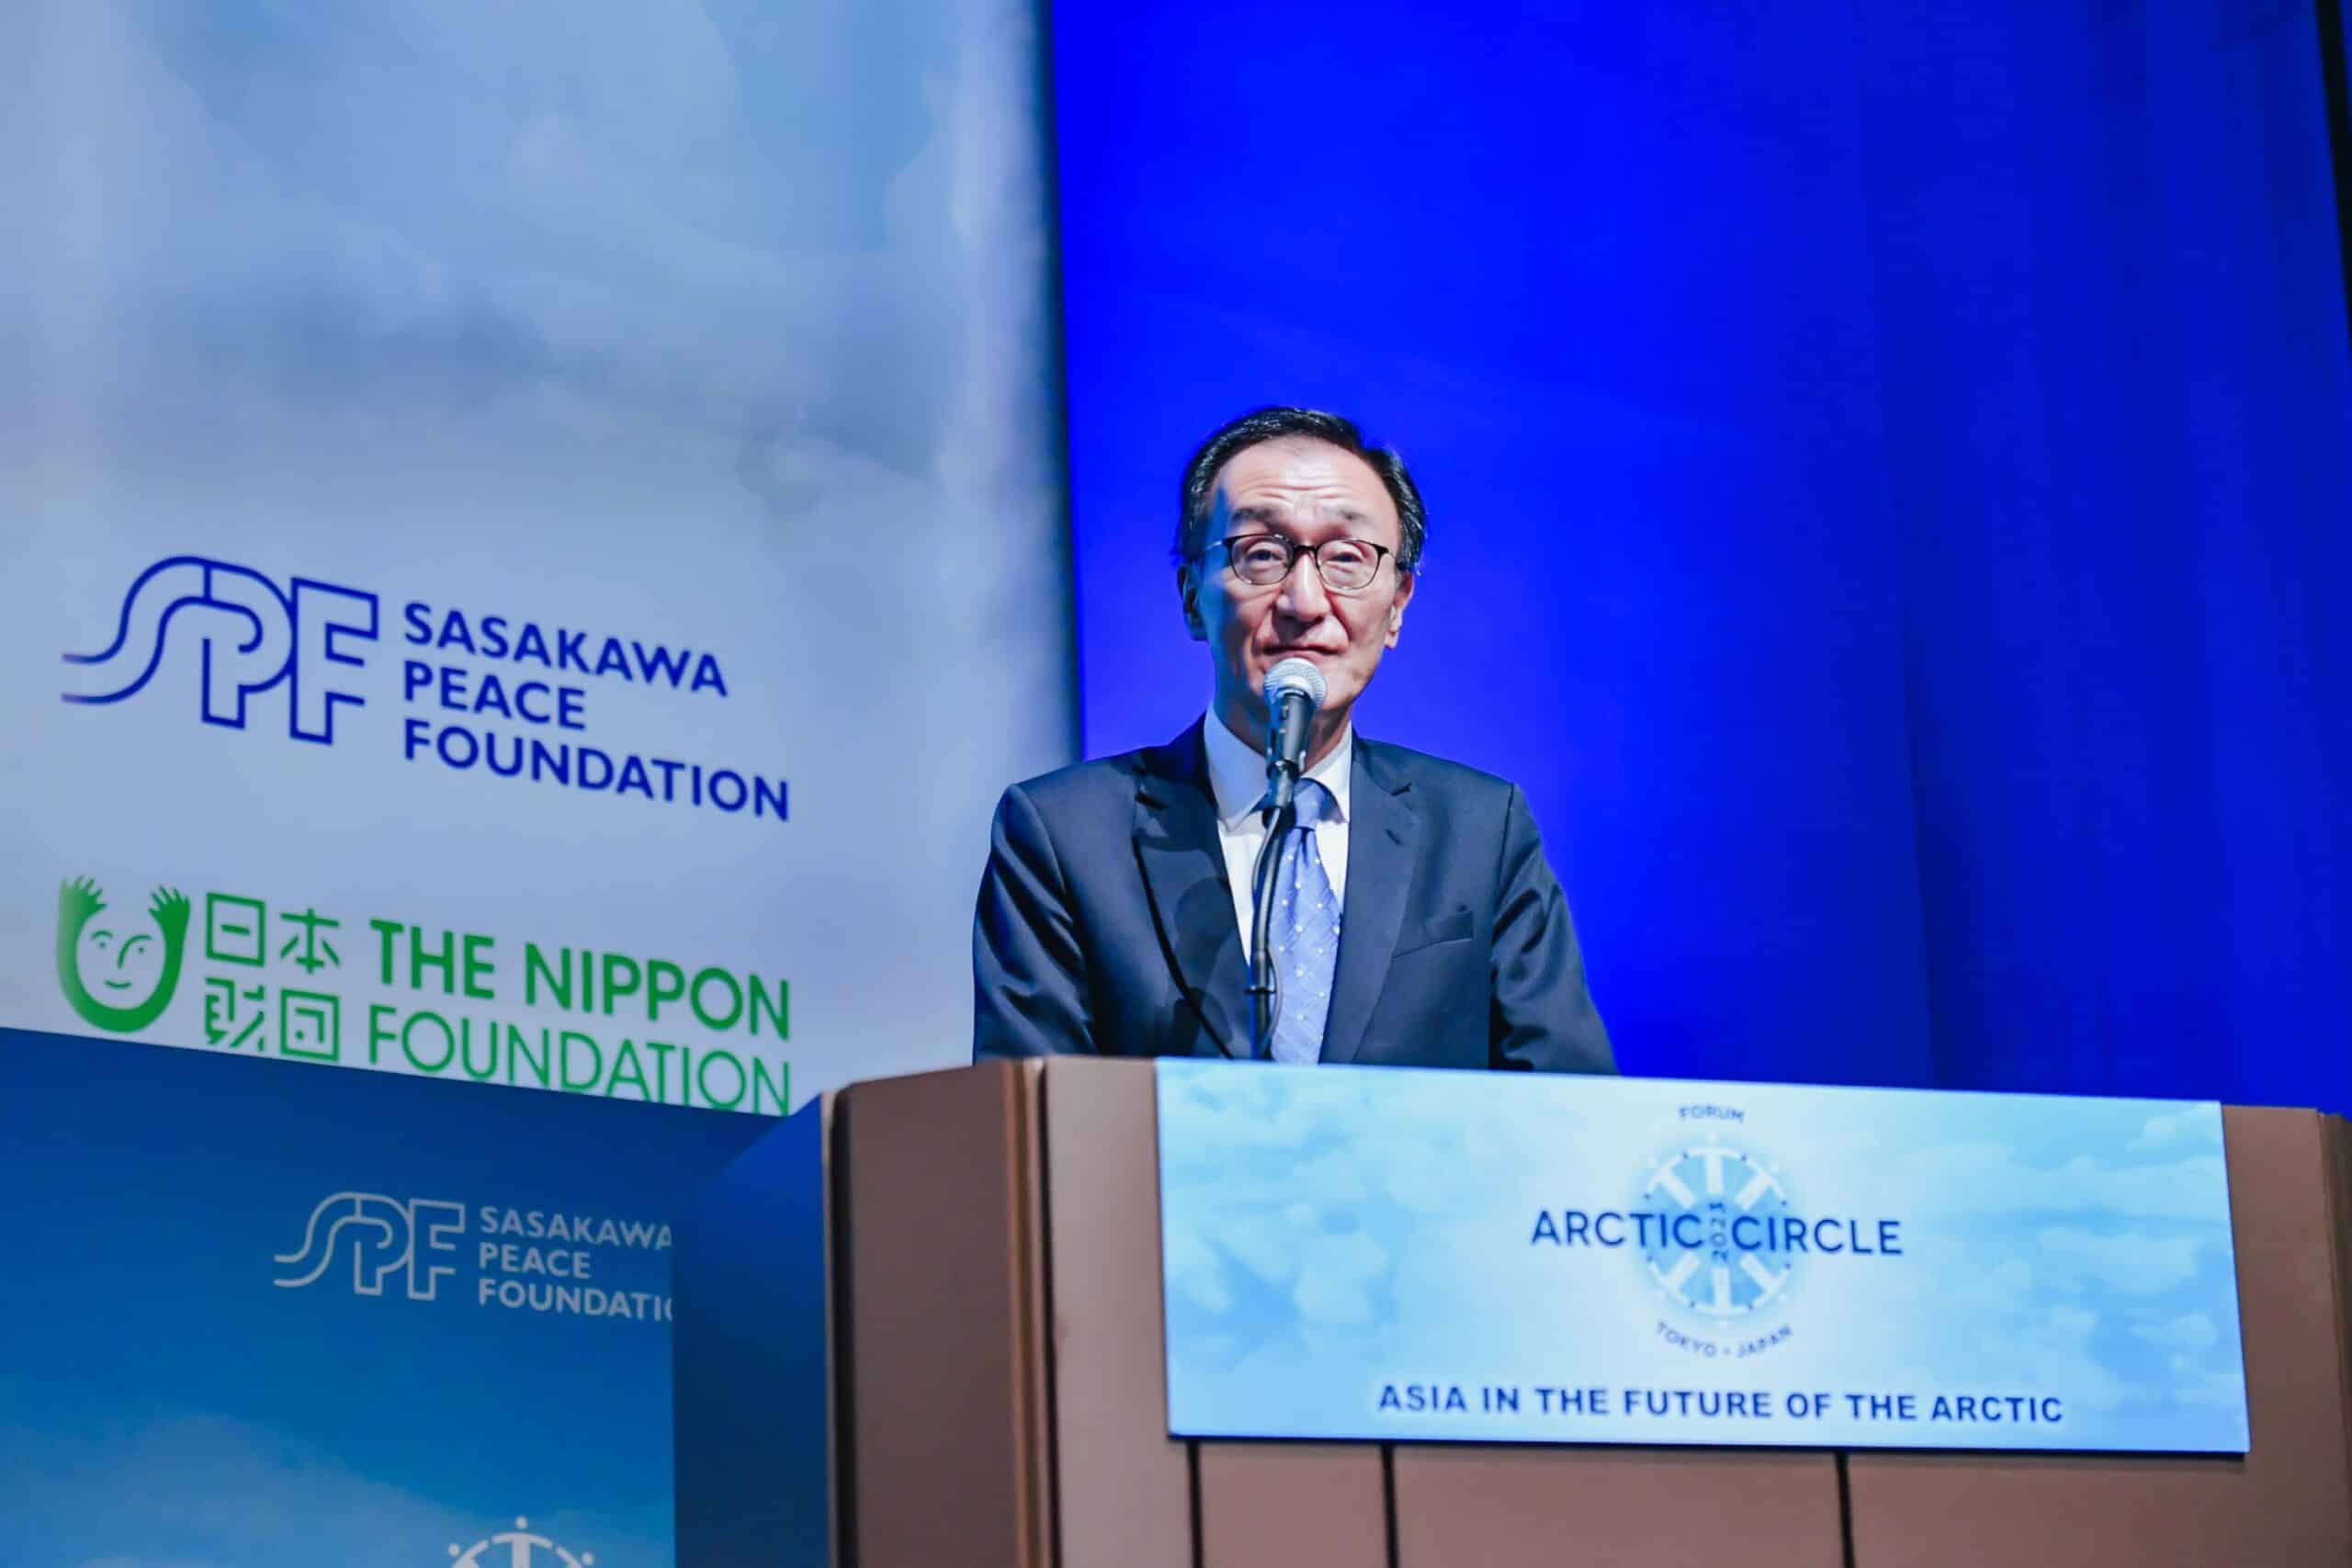 Keizo Takewaka speaks into a microphone at a podium with a dark blue and white background